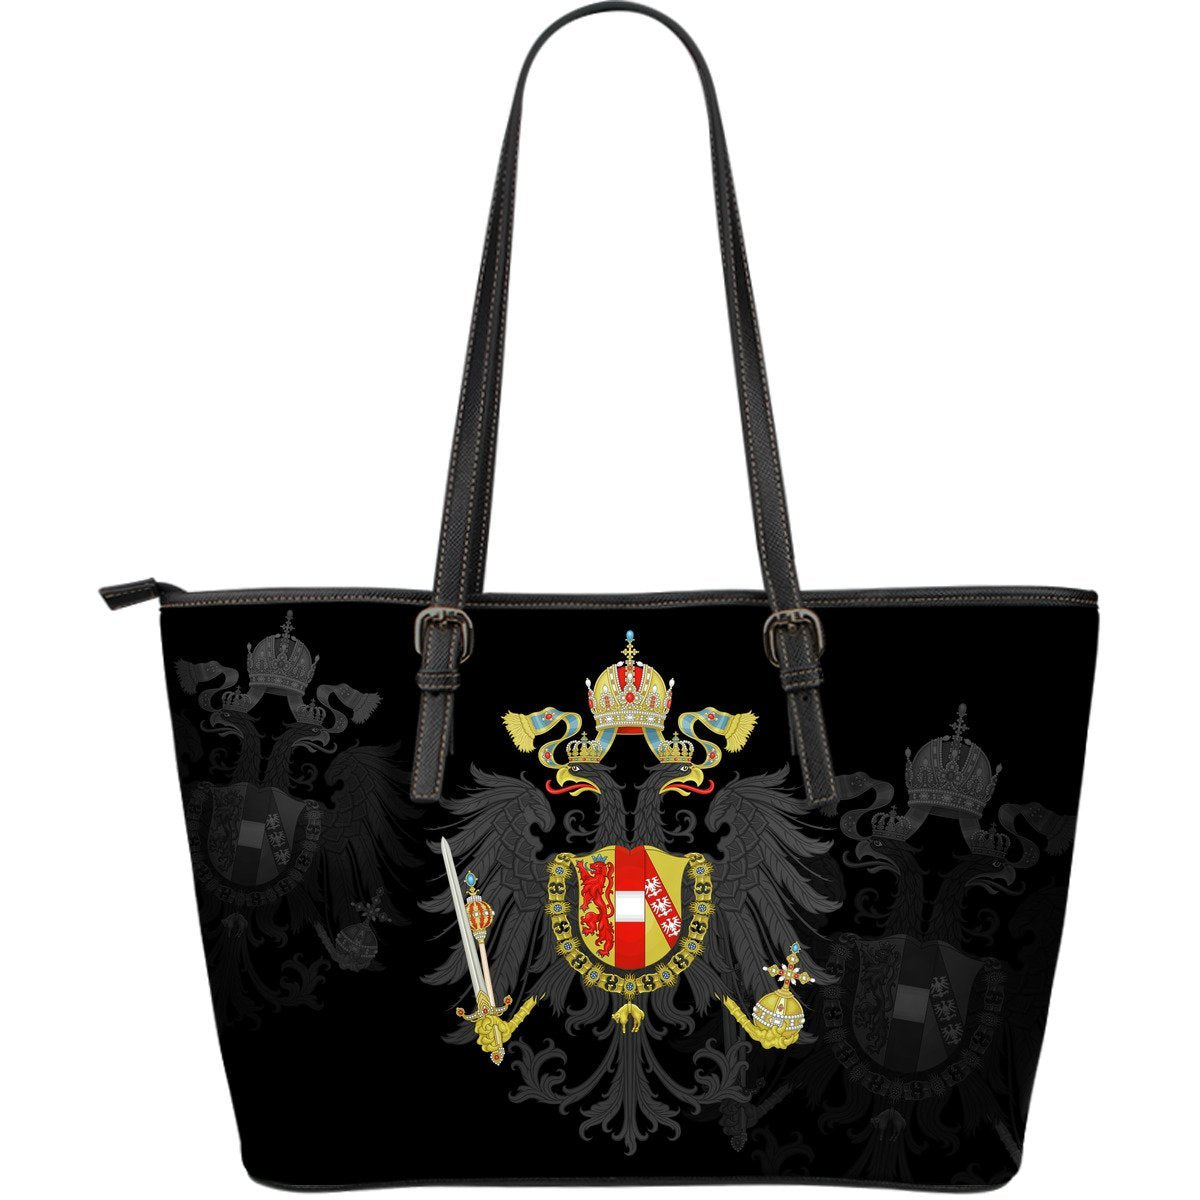 austrian-empire-leather-tote-bag-large-size